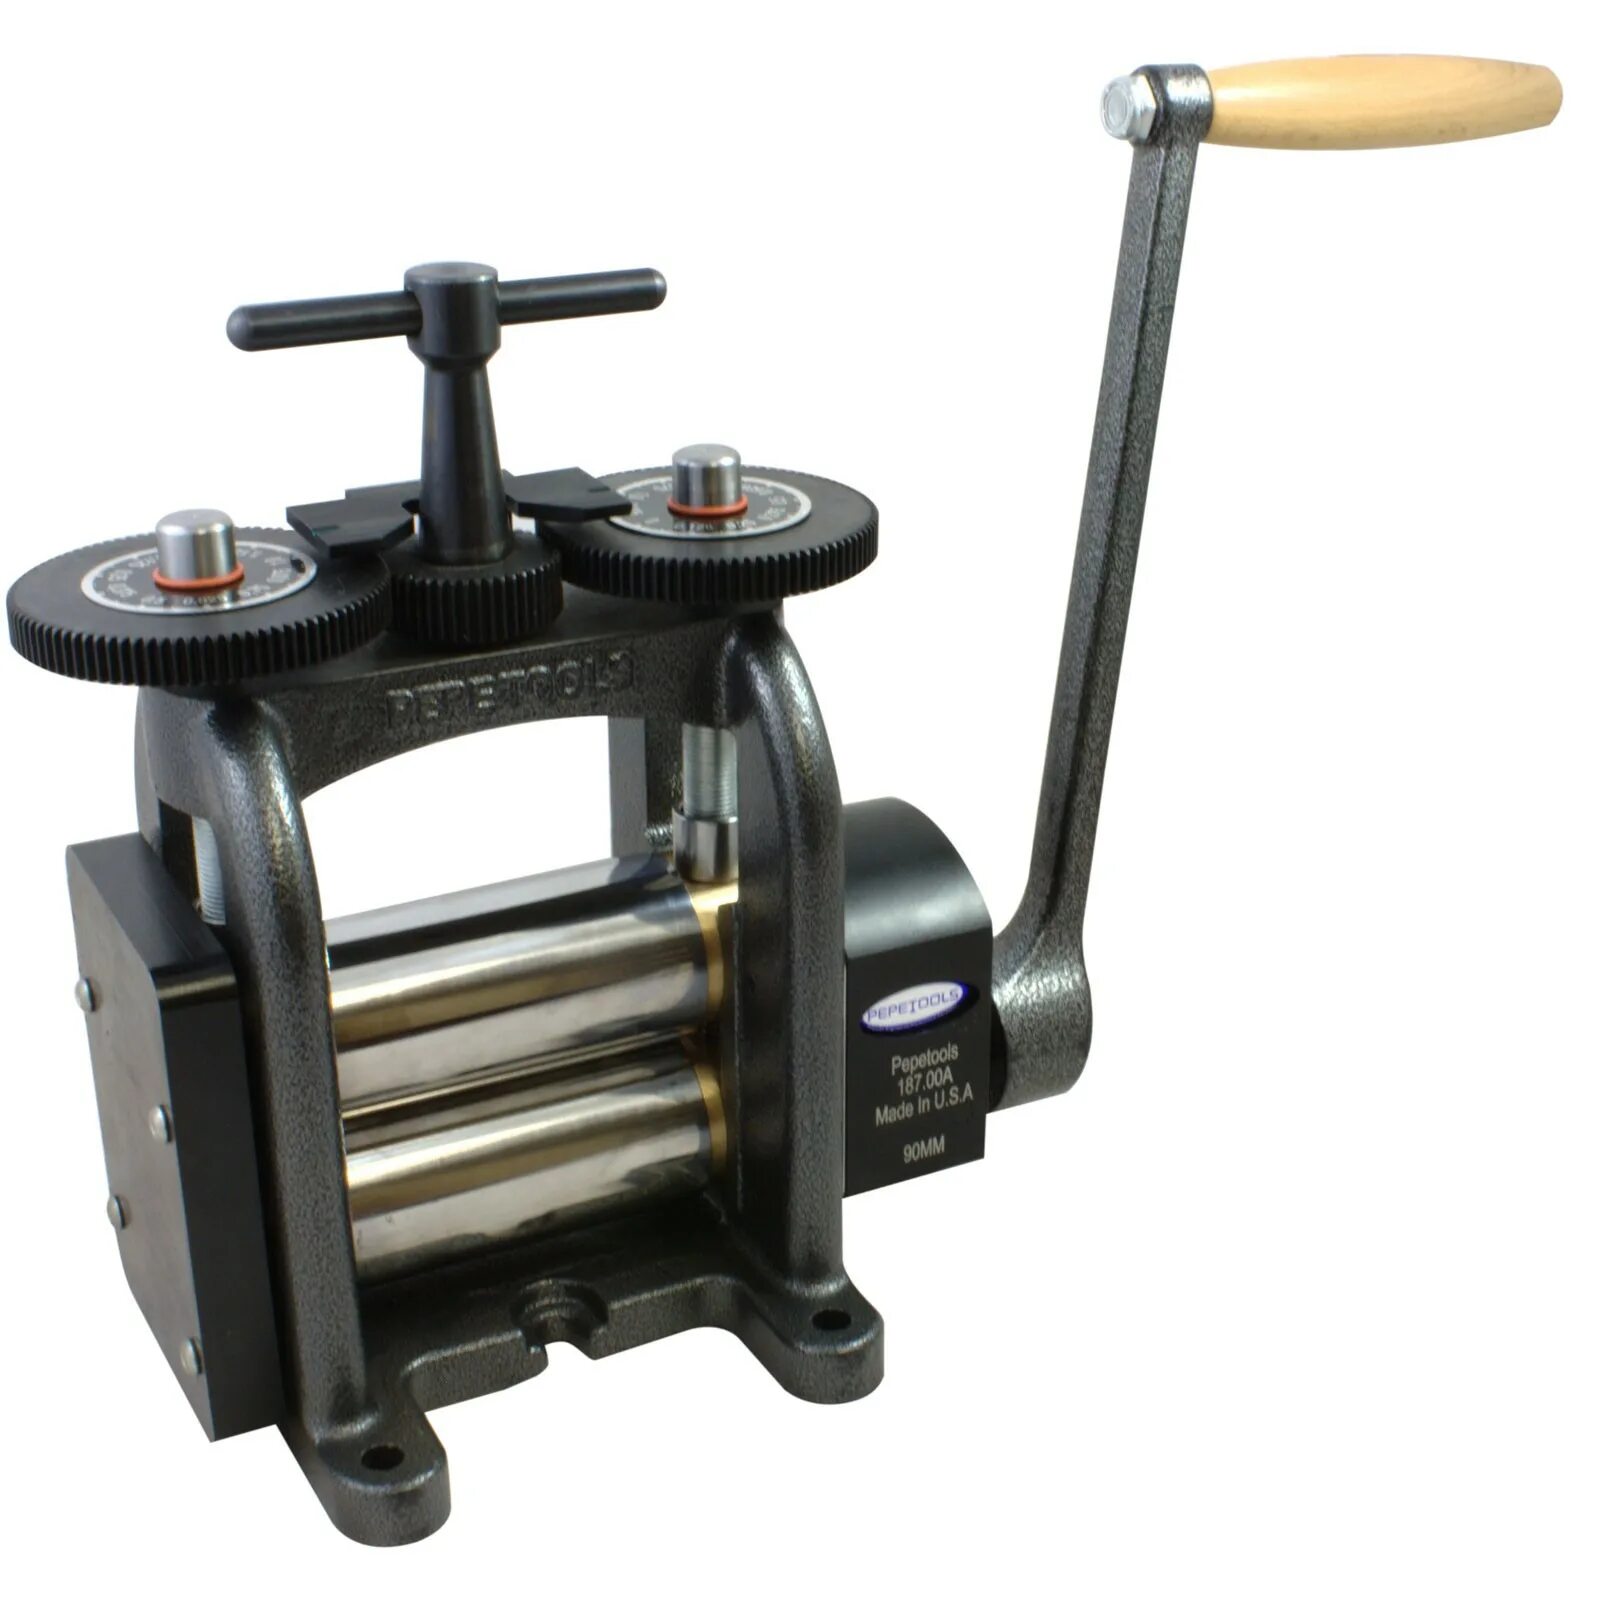 Mill rolls. Pepetools вальцы. Вальцы Pepe 187.20. Раскатка Pepe Tools. Rolling Mill.